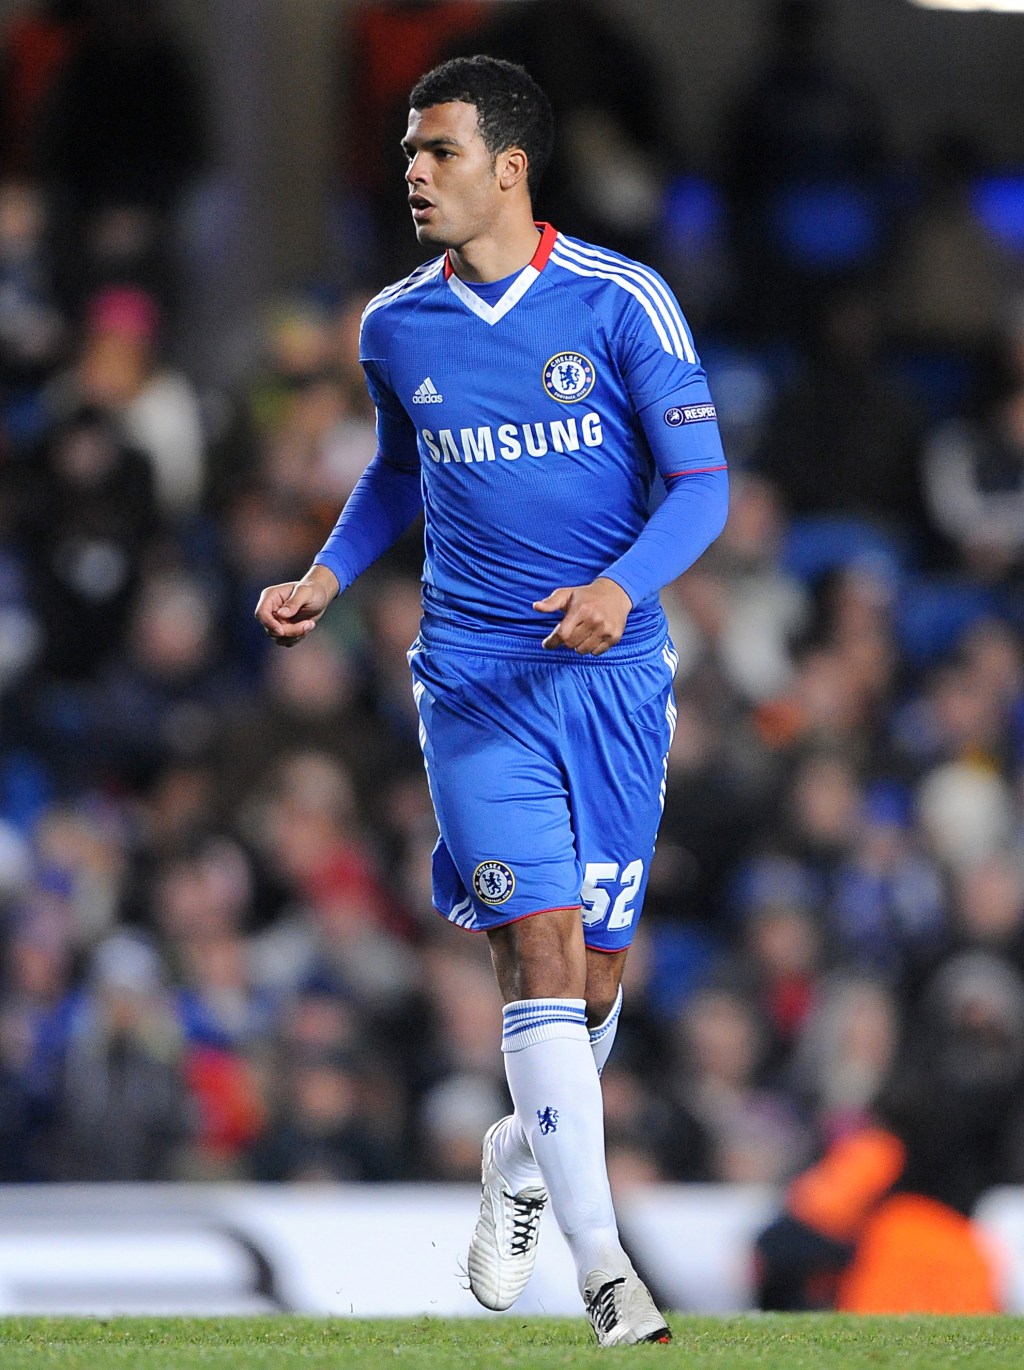 Jacob Mellis, Chelsea (Photo by Nigel French - PA Images via Getty Images)